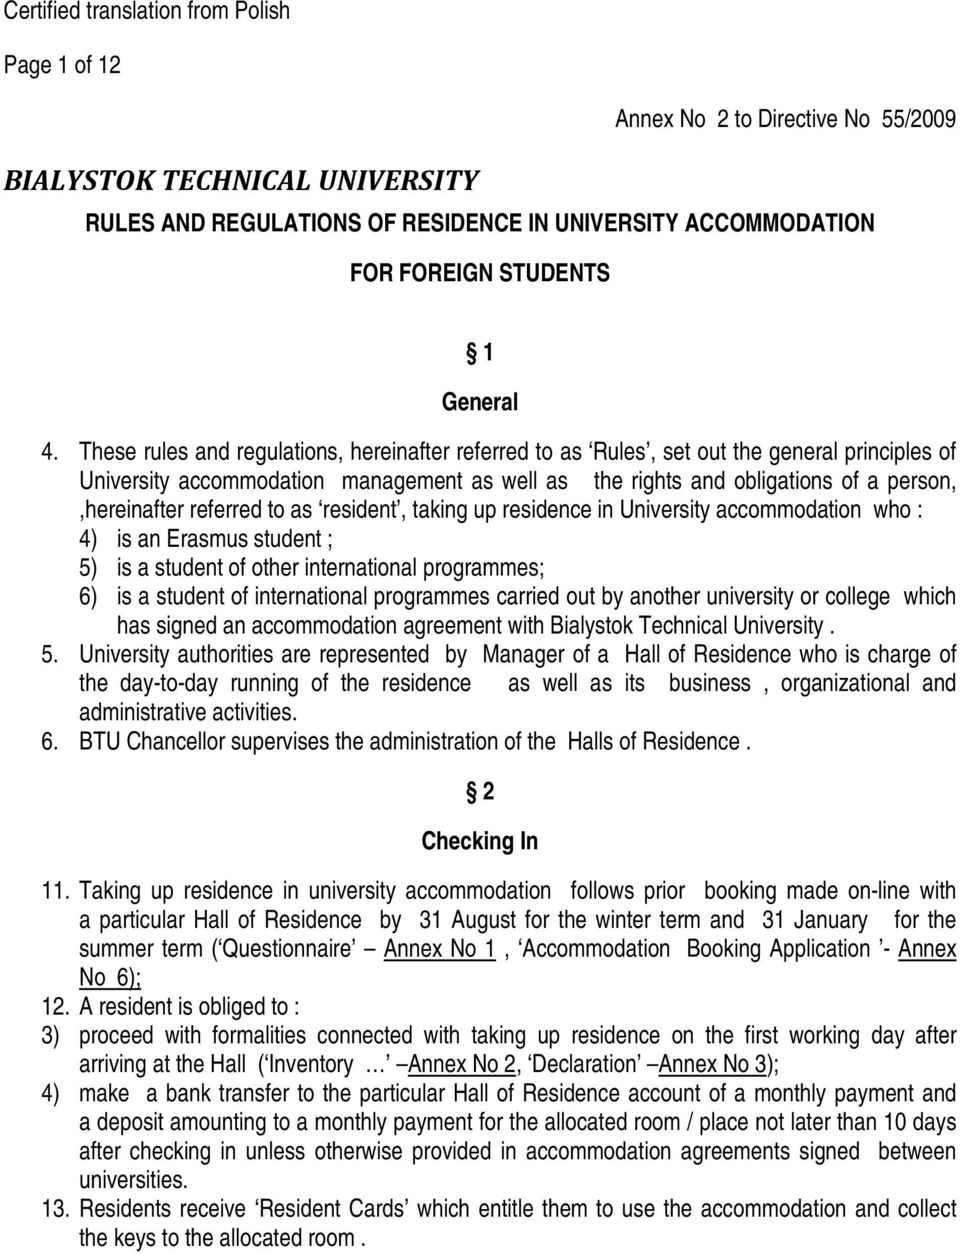 These rules and regulations, hereinafter referred to as Rules, set out the general principles of University accommodation management as well as the rights and obligations of a person,,hereinafter